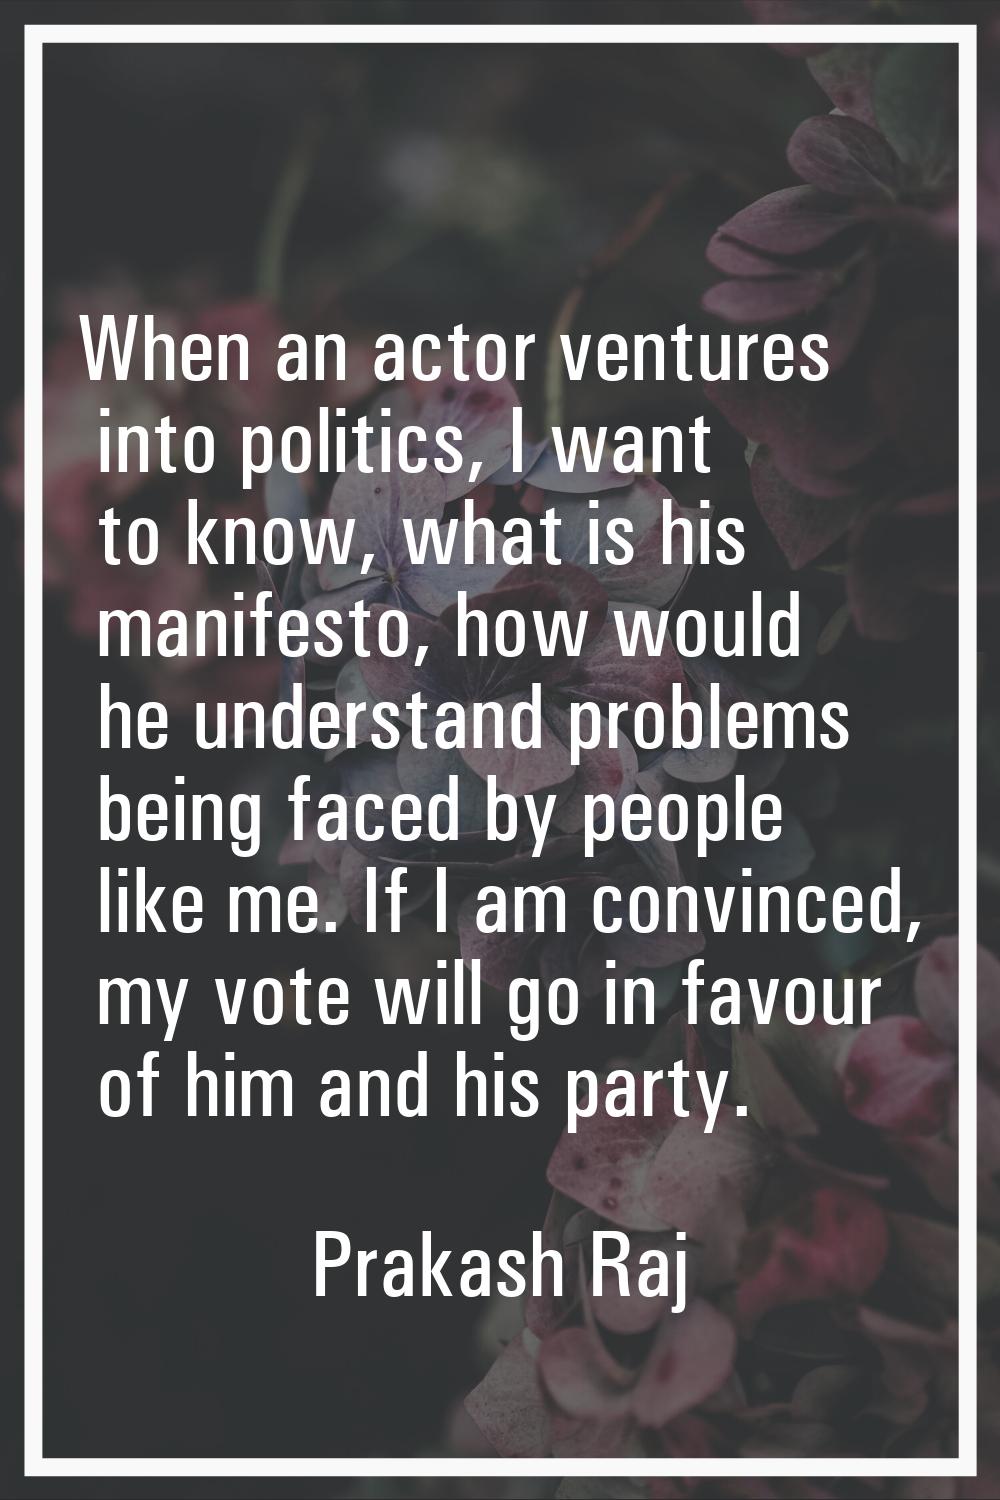 When an actor ventures into politics, I want to know, what is his manifesto, how would he understan